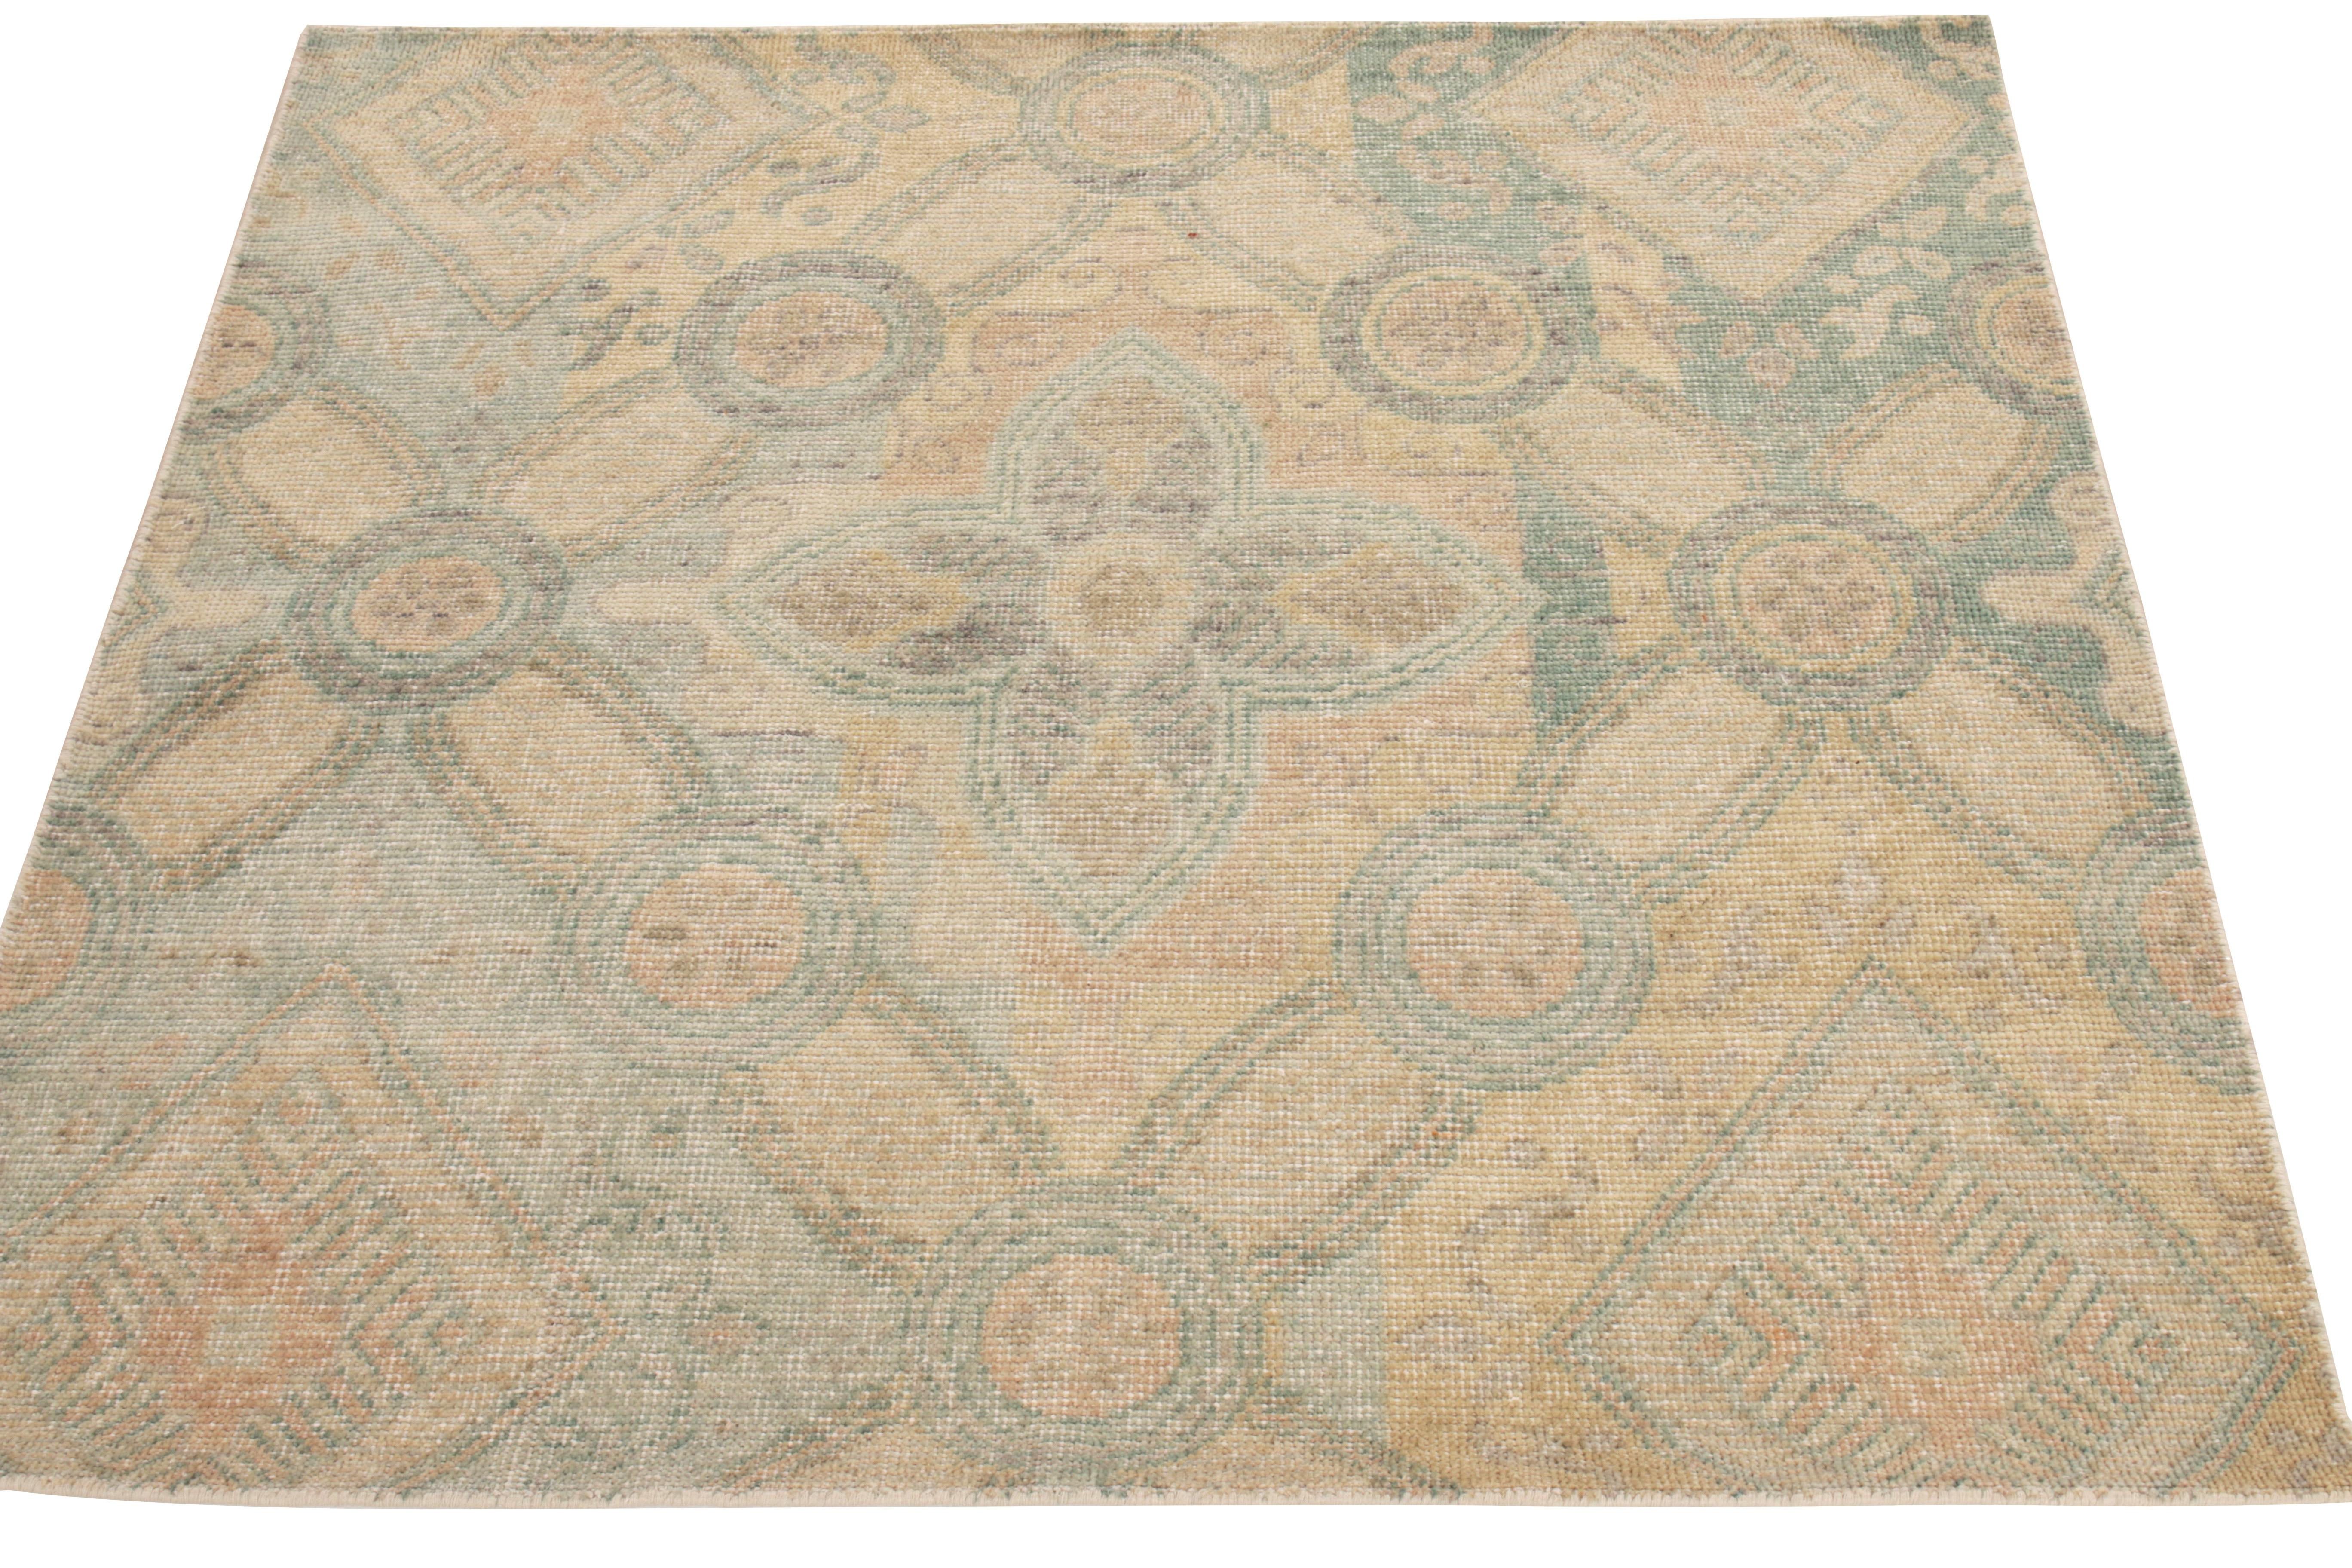 Boasting a delicious blend of floral patterns & art deco sensibilities, Rug & Kilim presents this distressed style rug from its Homage collection. Hand-knotted in wool, the 6x8 scale relishes gigantic florals & diamond designs in azure blue, green,